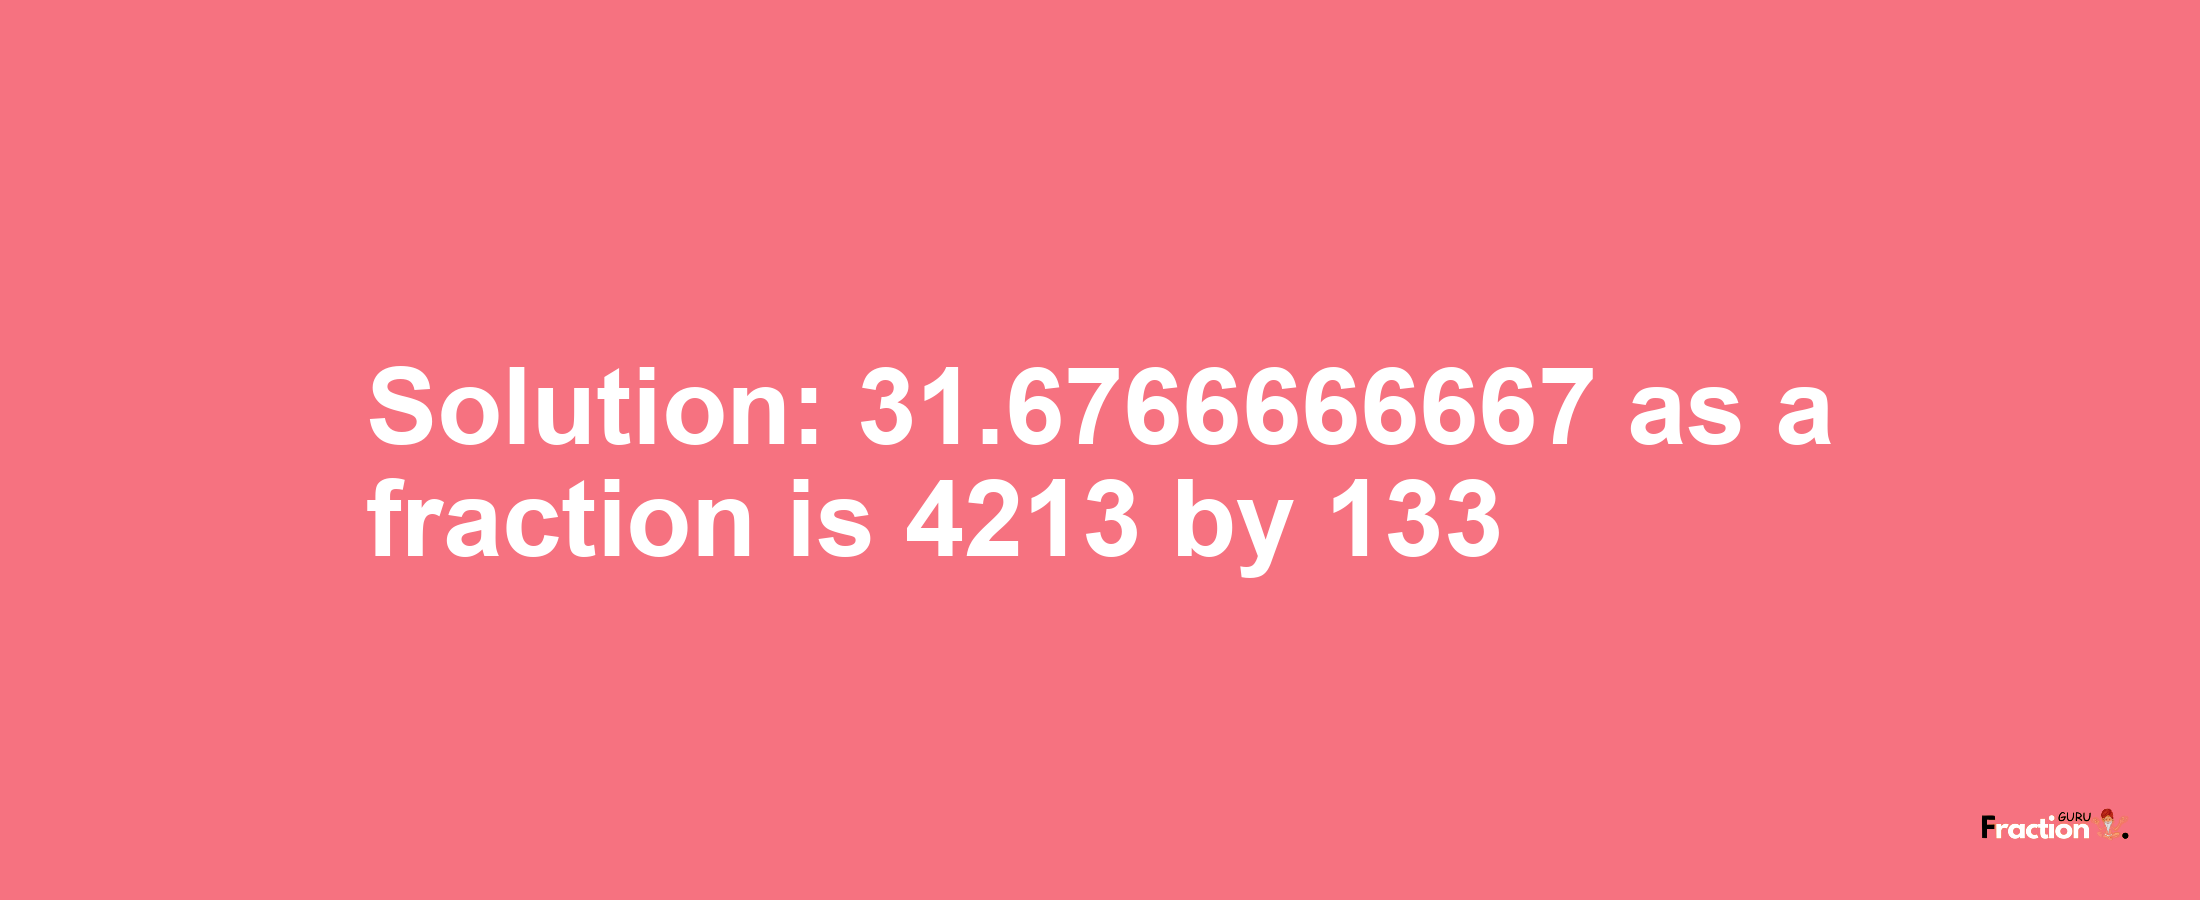 Solution:31.6766666667 as a fraction is 4213/133